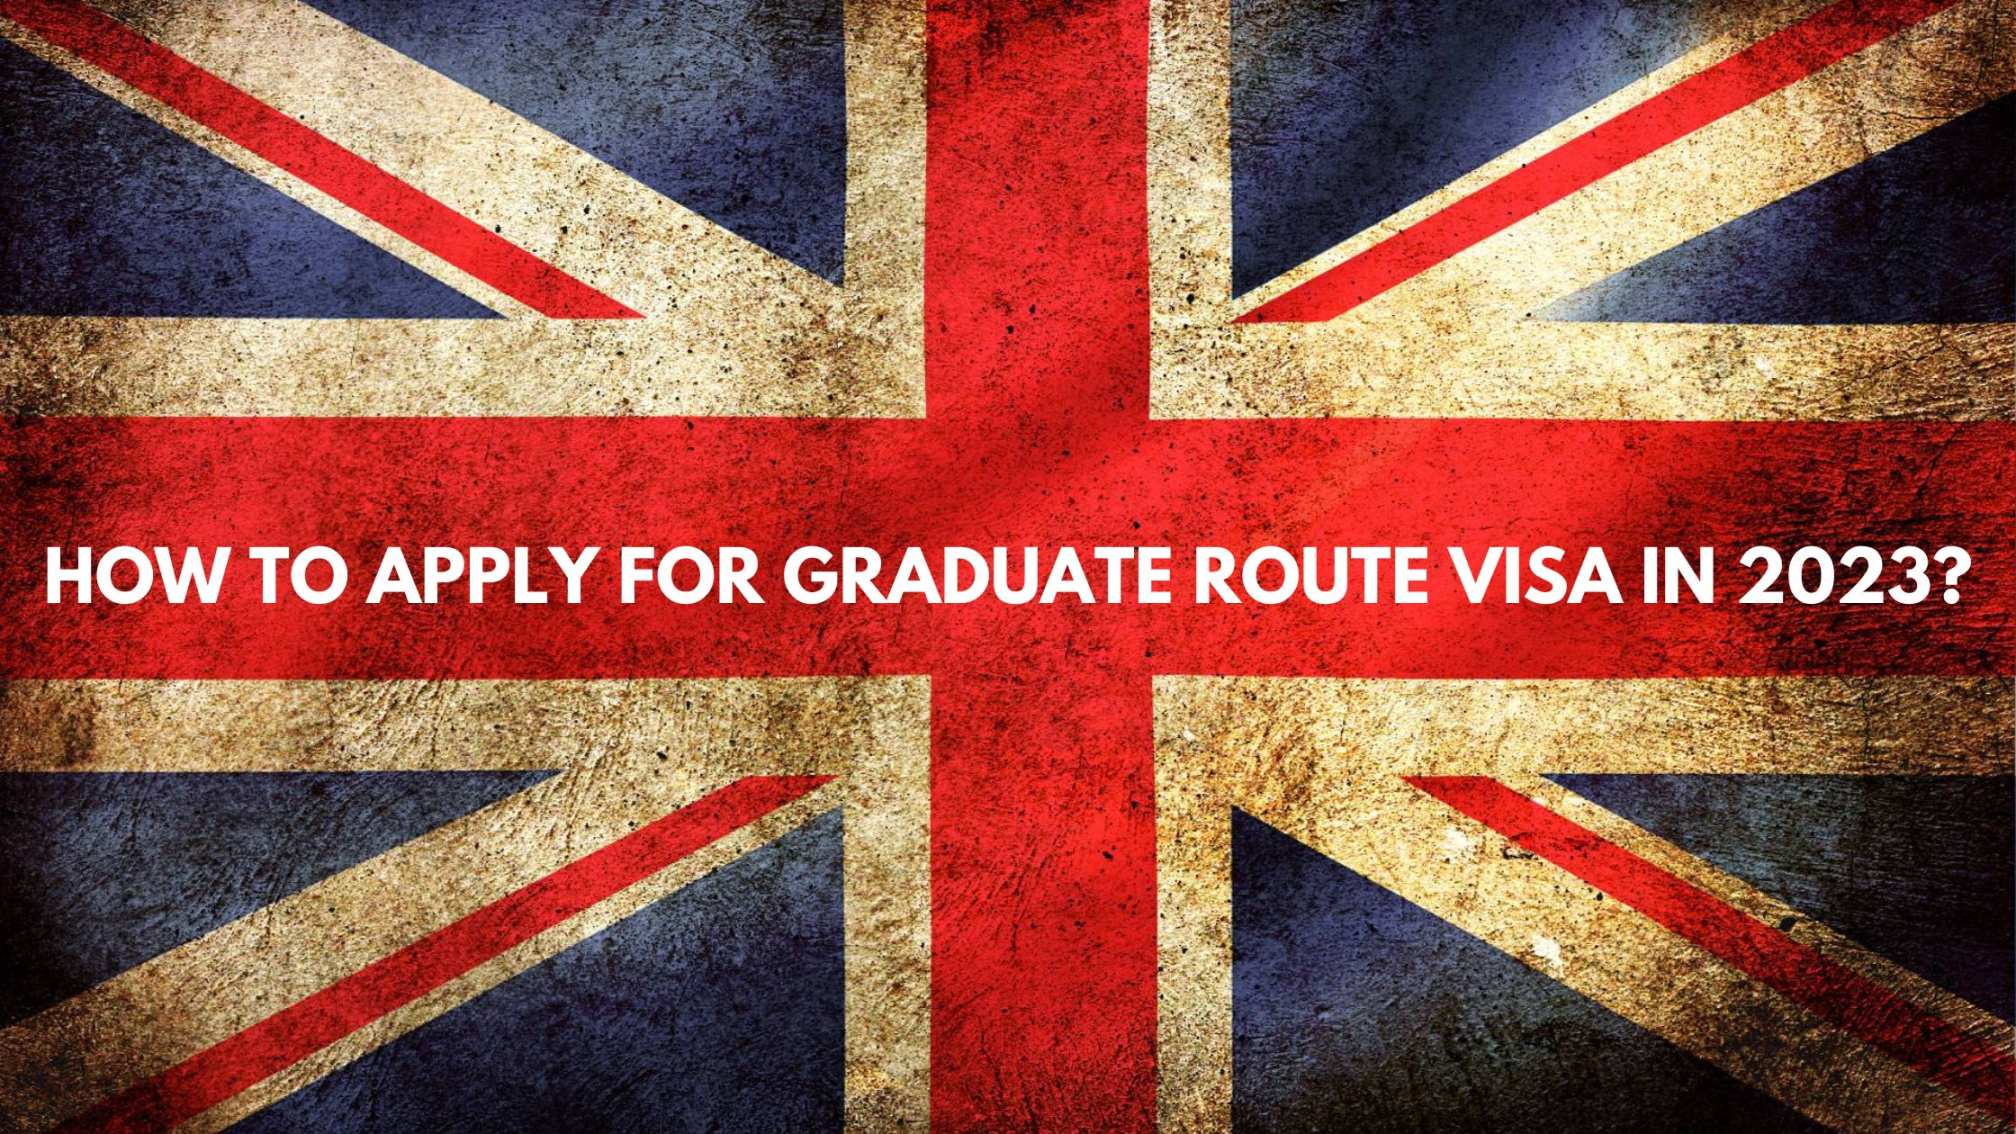 How To Apply For Graduate Route Visa In 2023?